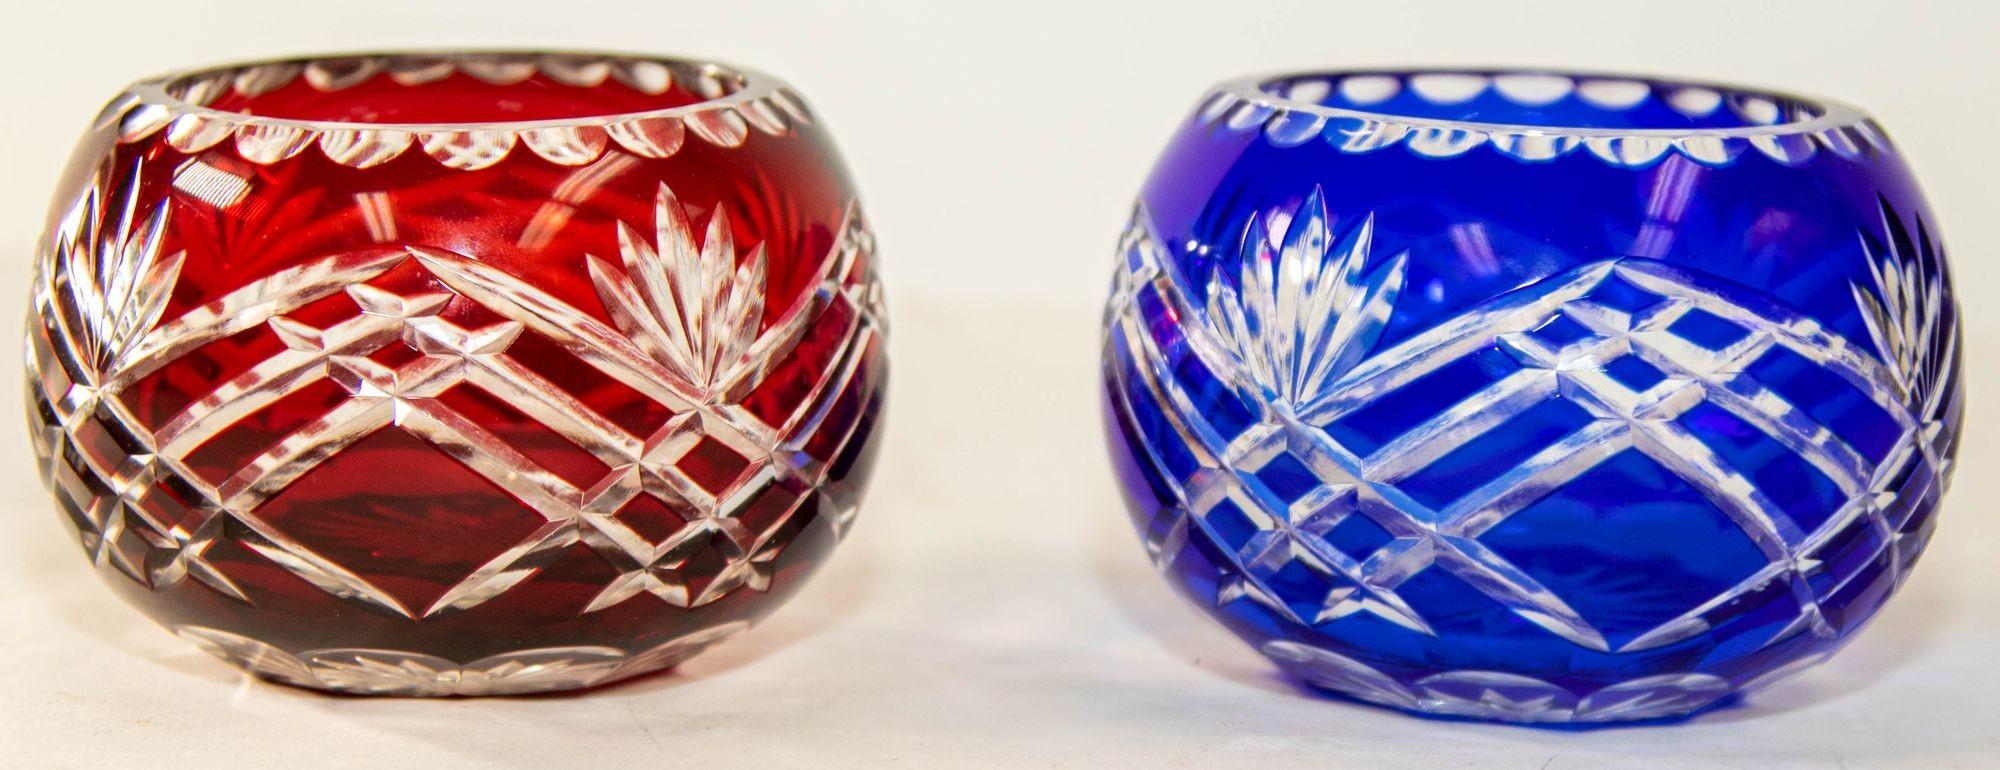 Vintage Bohemian Cobalt Blue and Ruby Red Cut to Clear Crystal Votive Candle Holder.
Set of two Bohemian cut crystal votive holder in cobalt blue and ruby red color cut to clear and decorated with hand cut stars.
Perfect for adding soft lighting